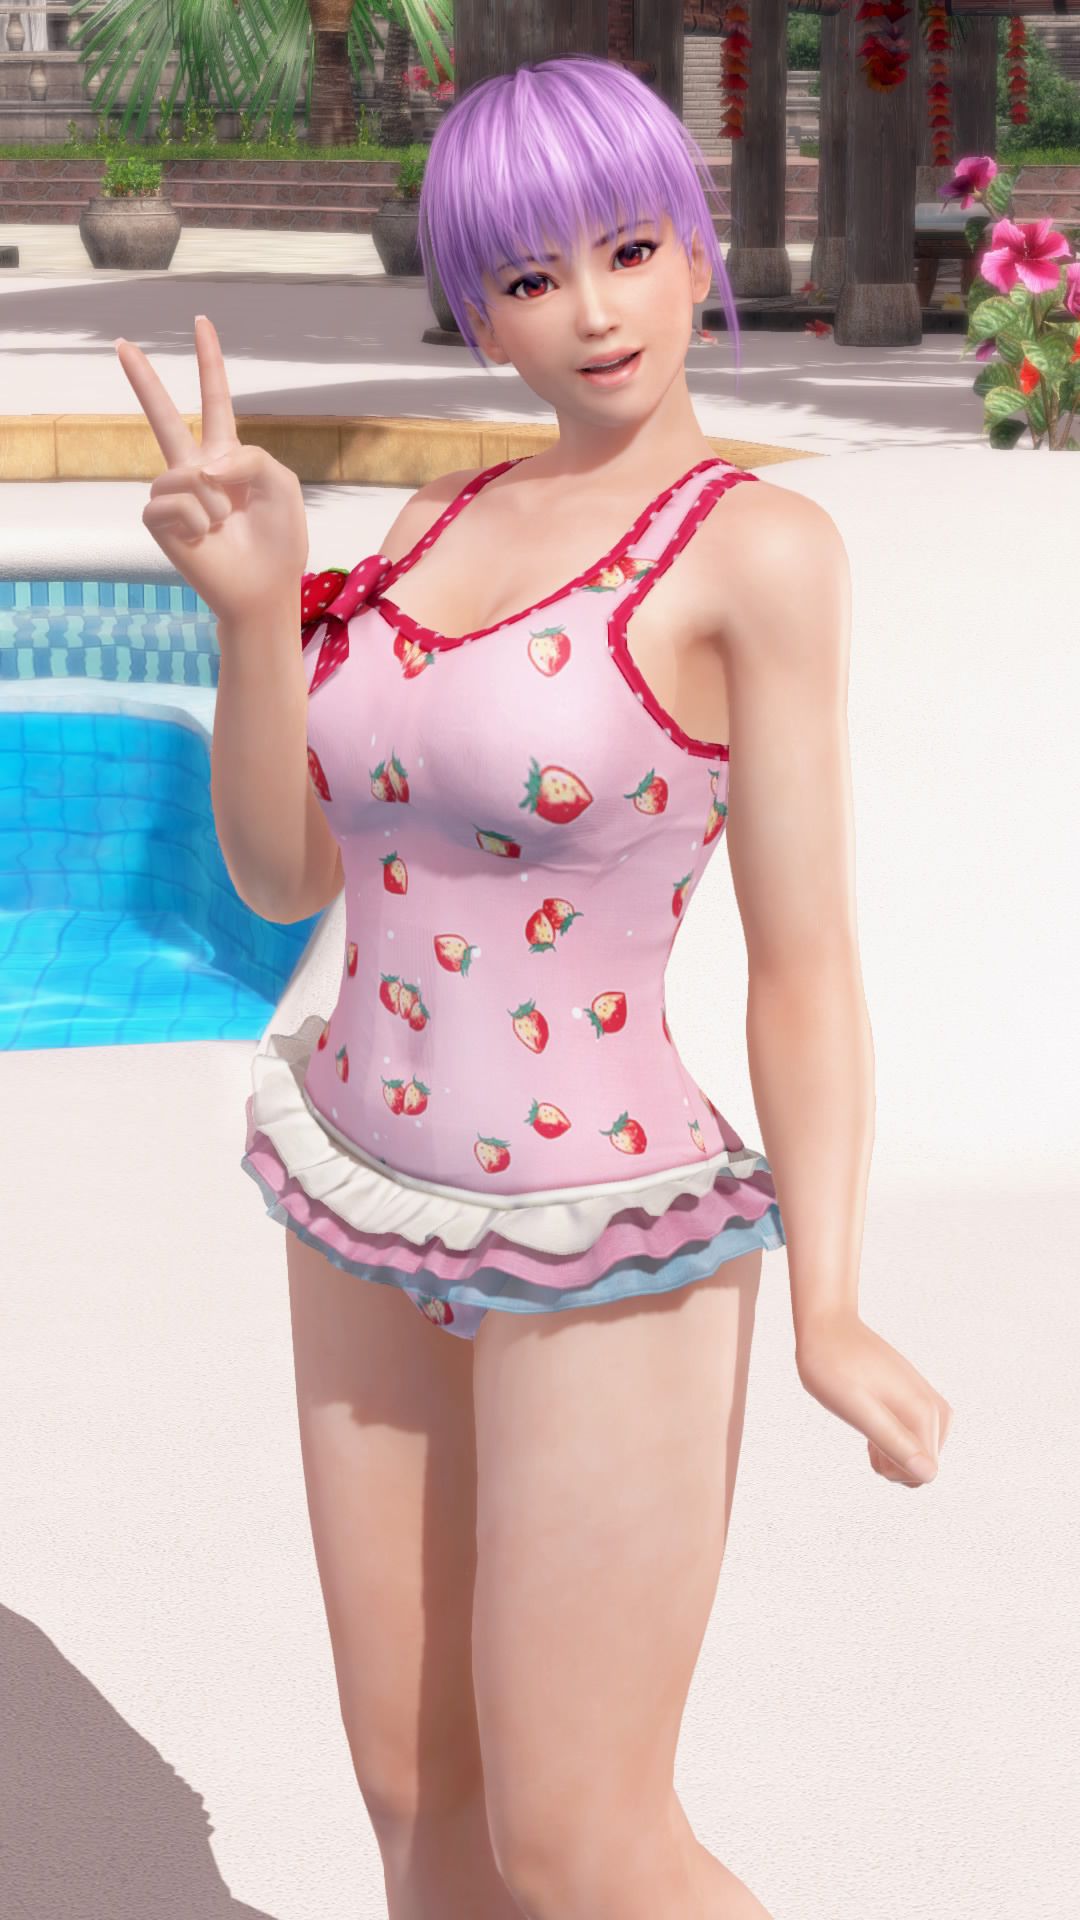 Doax3 "The color which suits the Aya-chan is pink" theory is verified 11